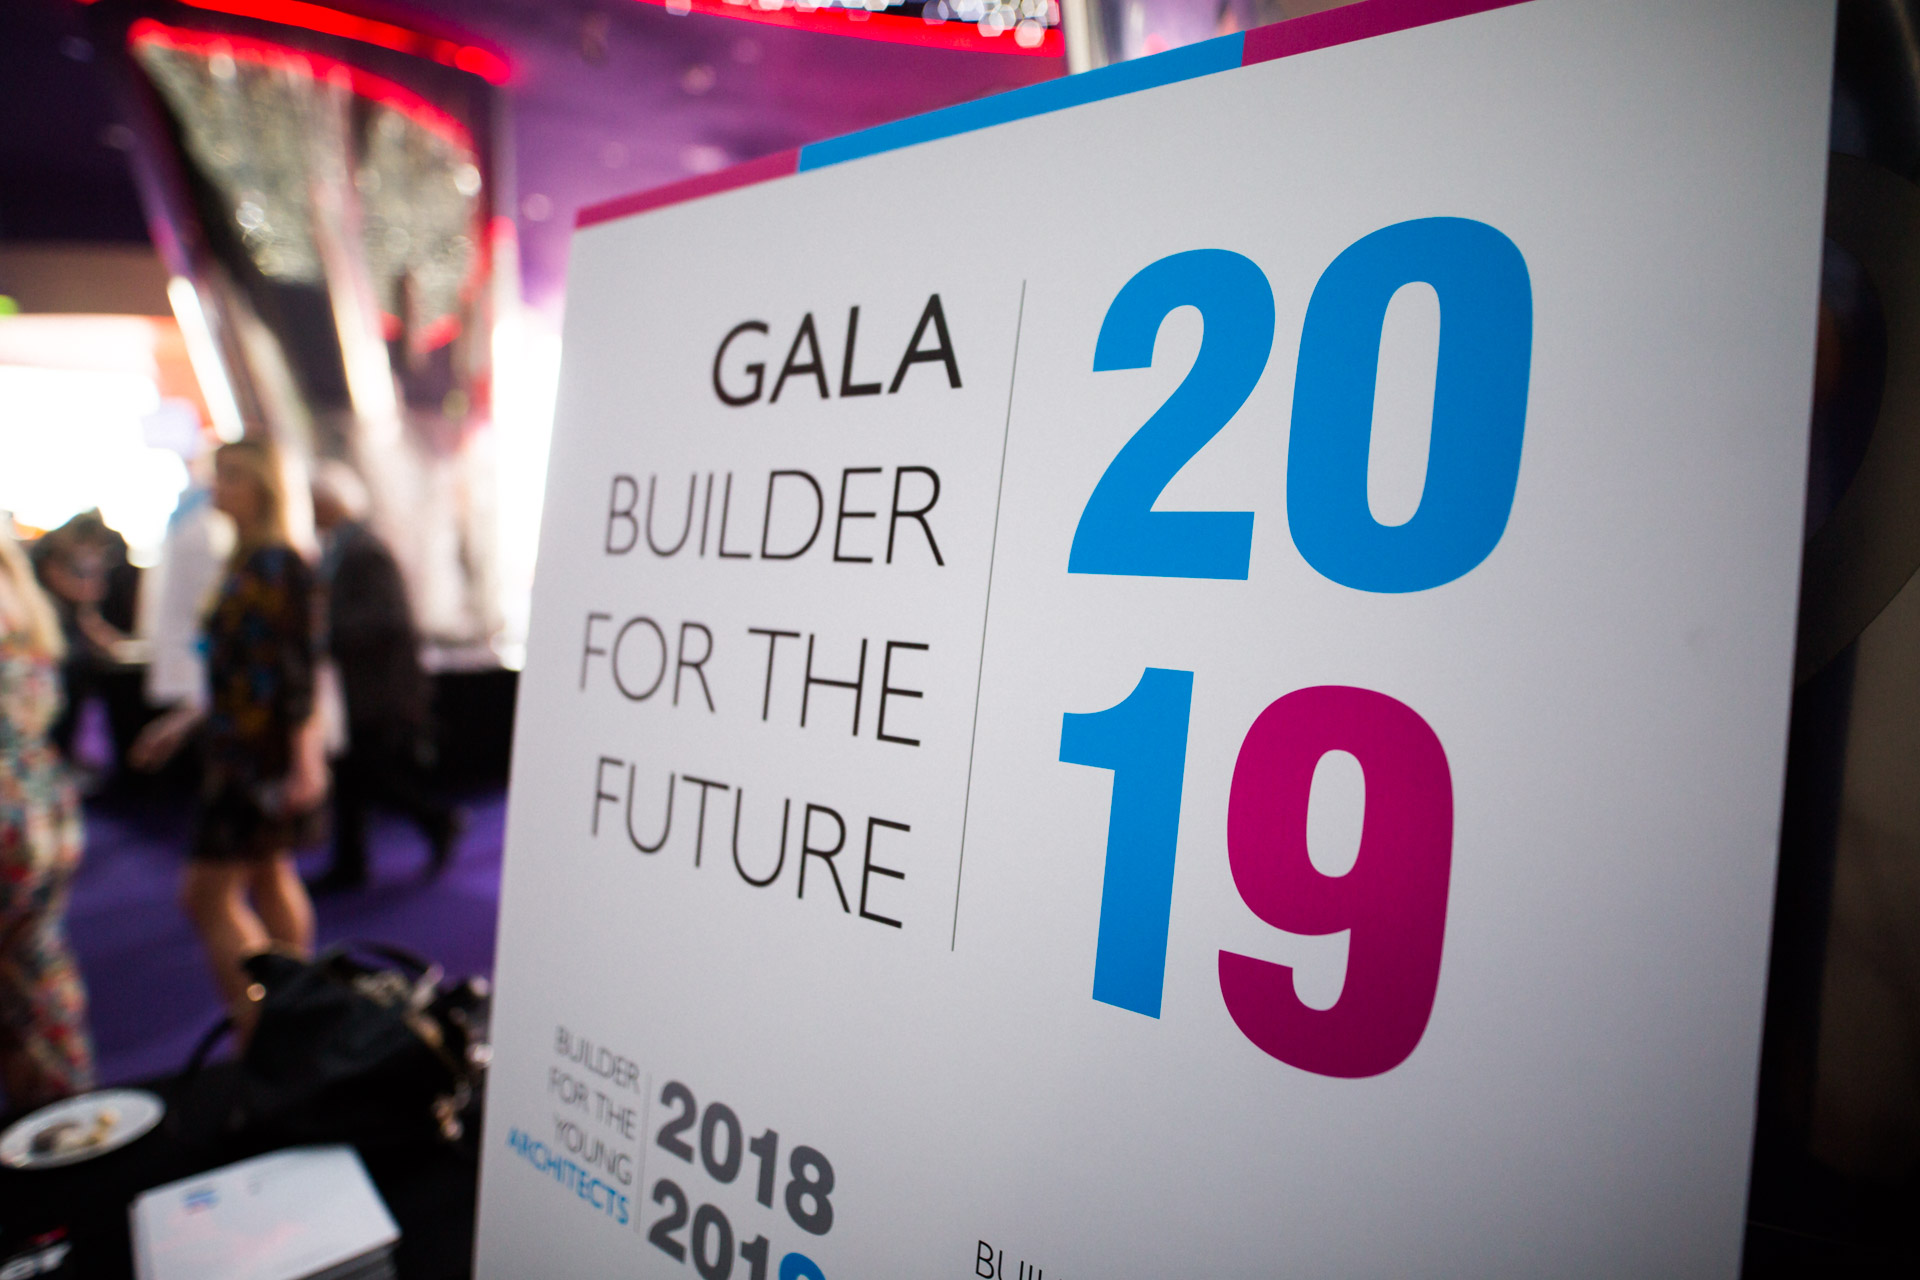 GALA BUILDER FOR THE FUTURE – EDYCJA 2018/2019